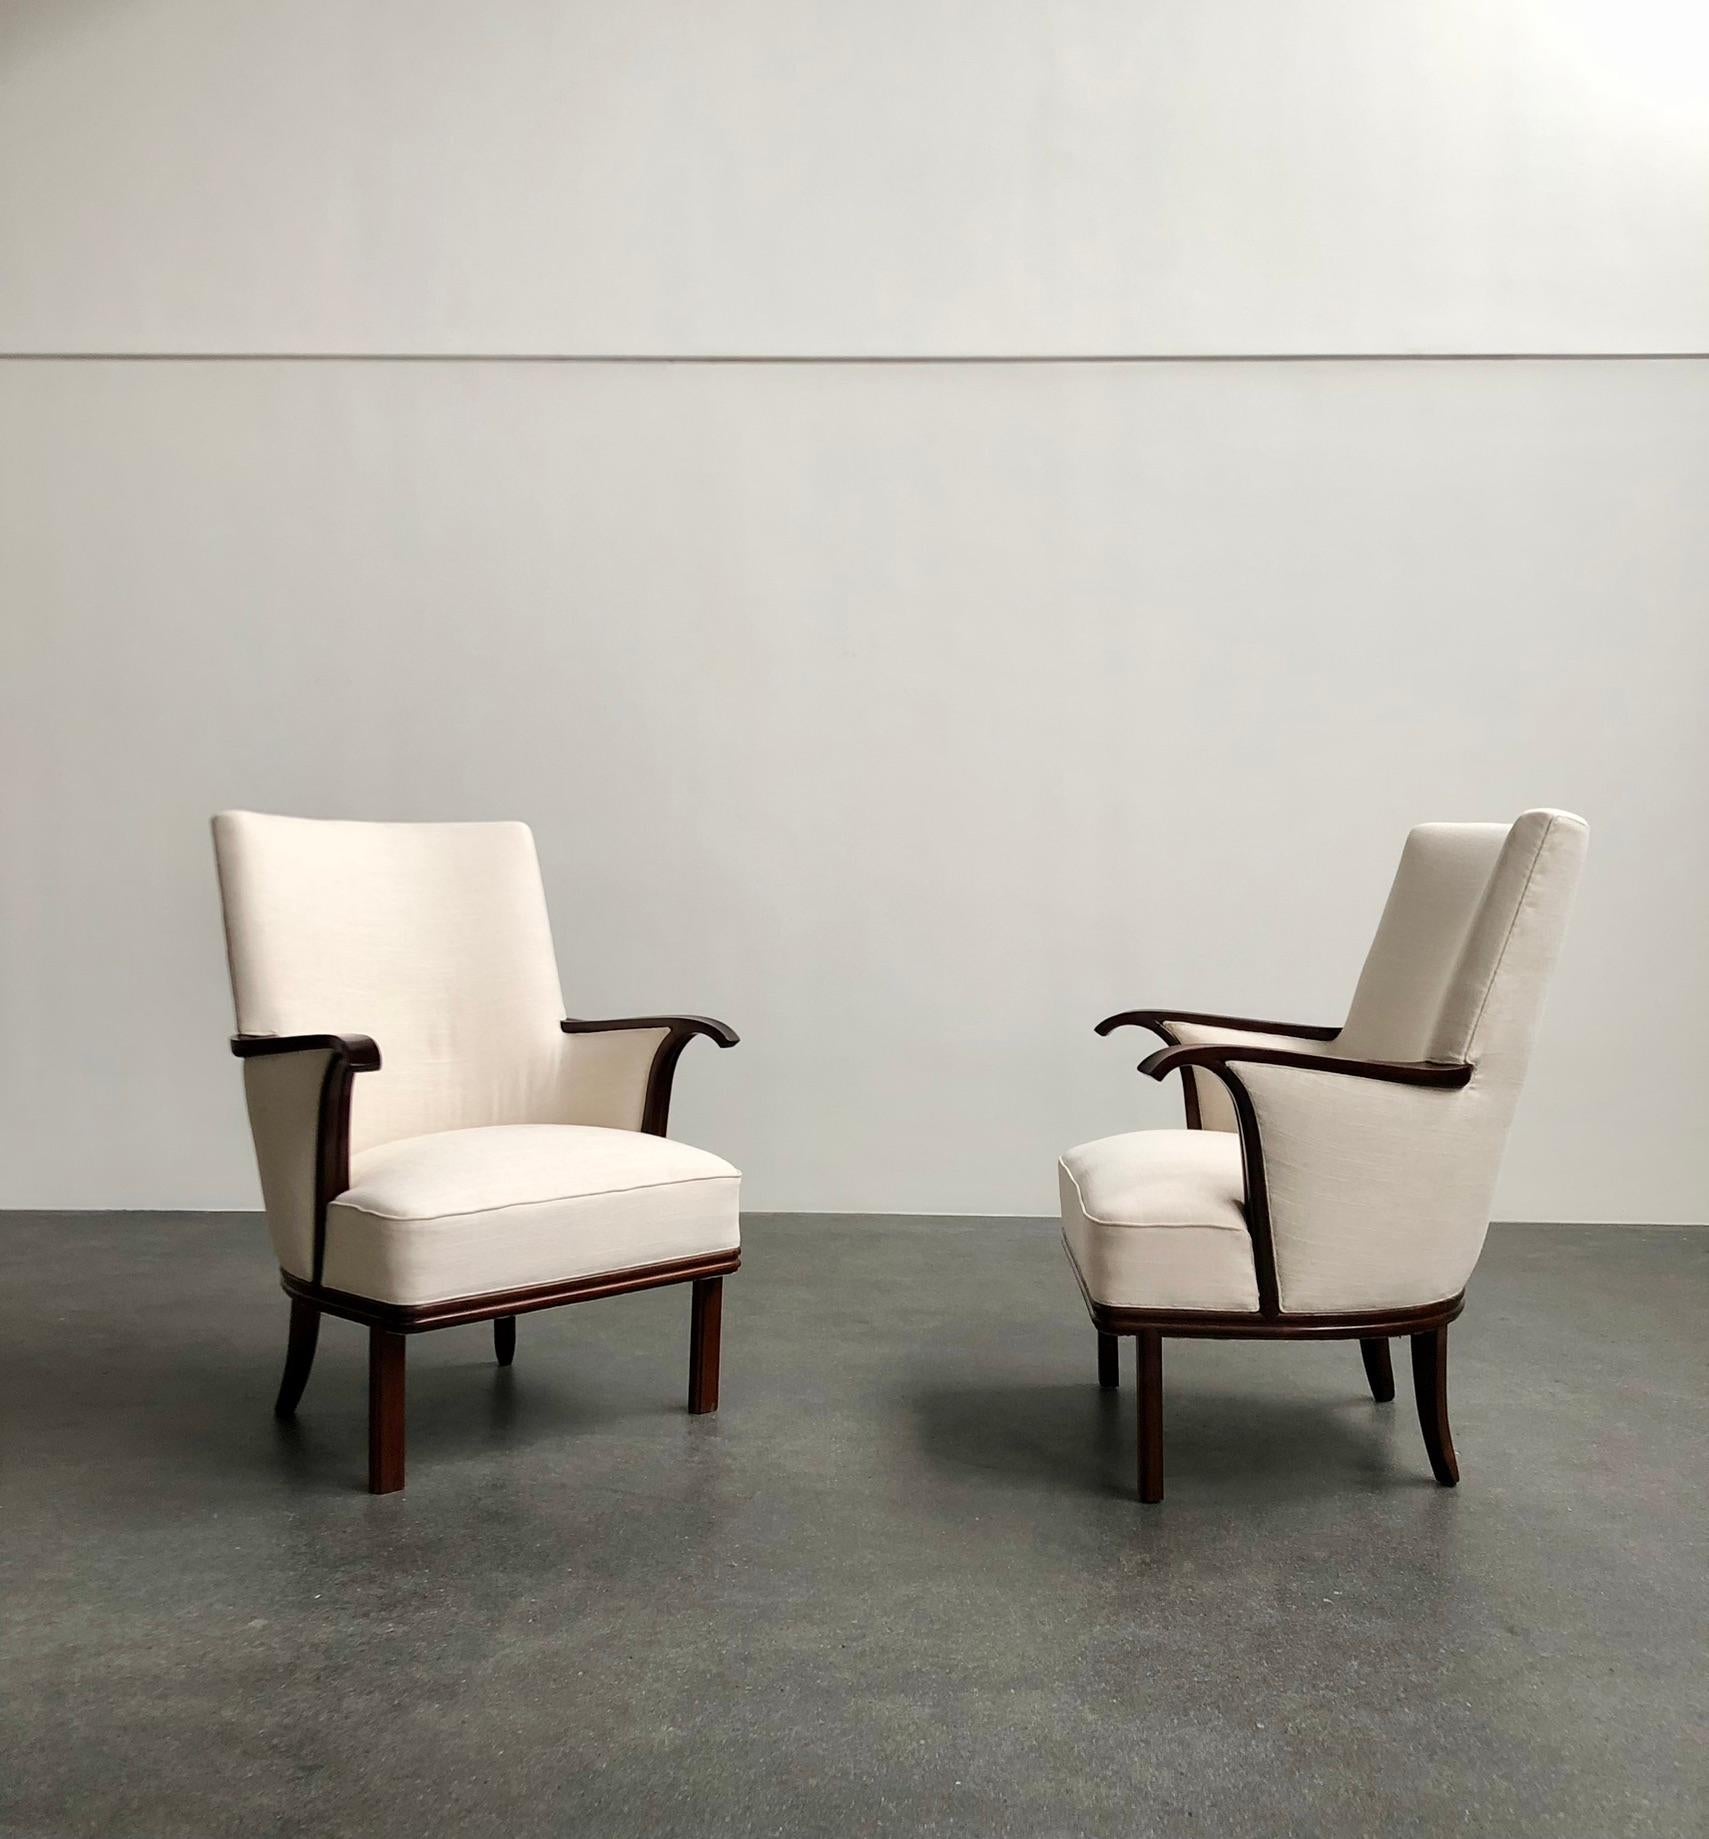 Pair of highback armchairs designed by danish architect Ernst Kühn, 1935.

Newly reupholstered in fabric. The rosewood has been refinished.

This is a unique pair of chairs that was made exclusively as part of the interior for “Villa Koux” in